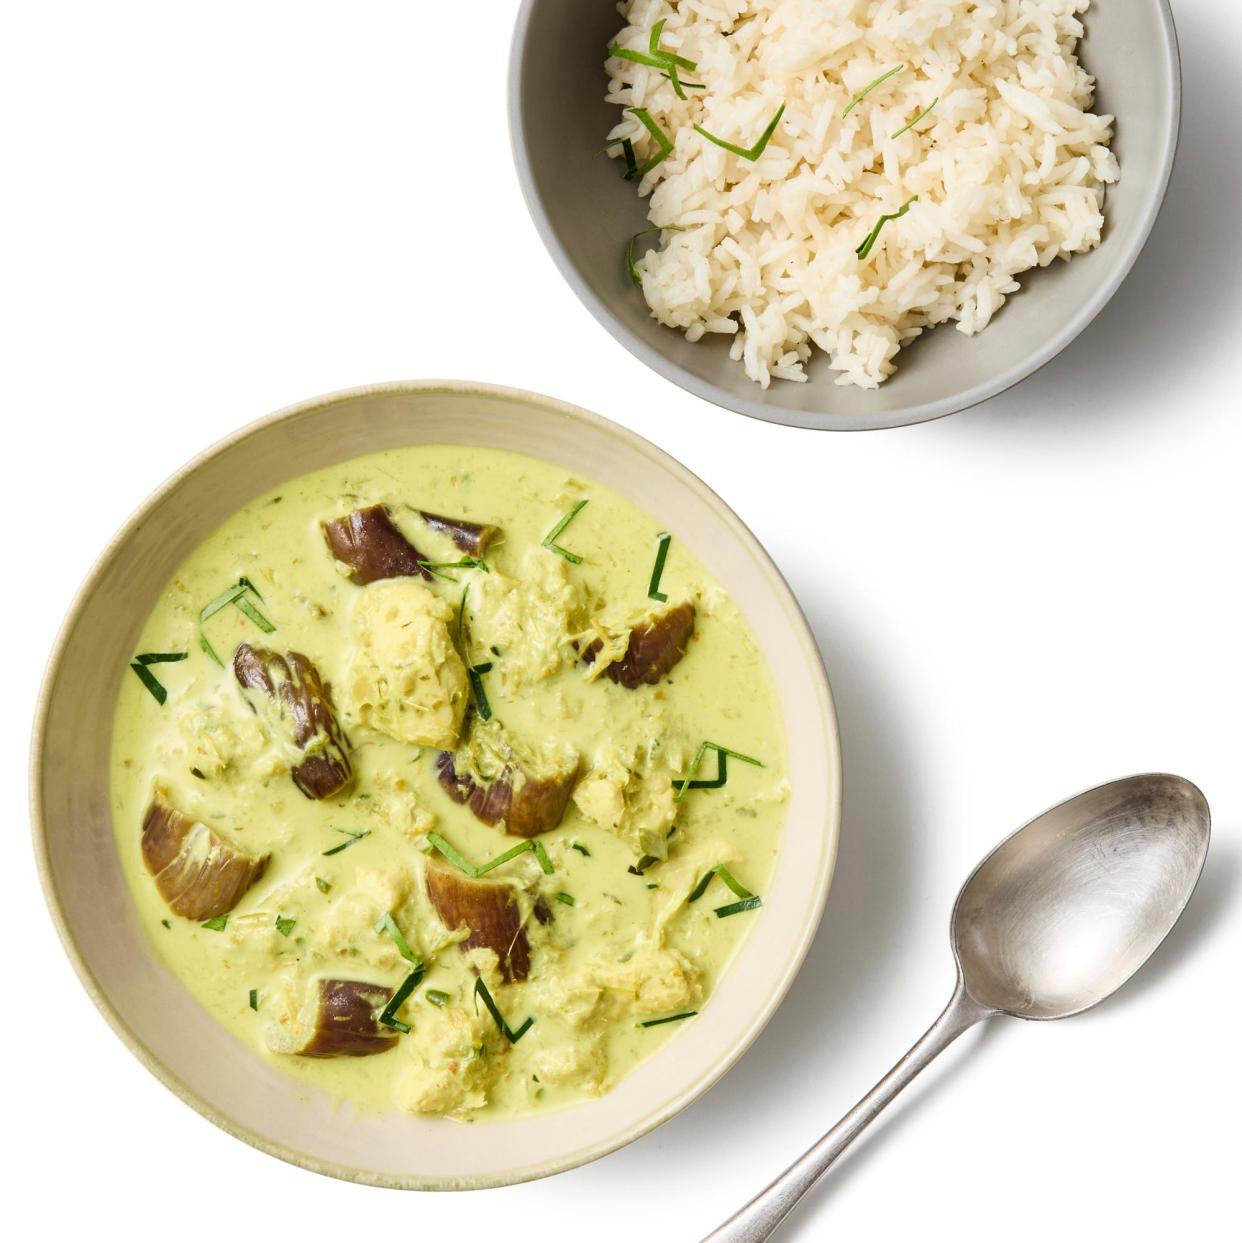 <span>Felicity Cloake’s Thai green curry works with chicken, seafood, pork, beef or tofu.</span><span>Photograph: Robert Billington/The Guardian. Food stylist: Loic Parisot.</span>